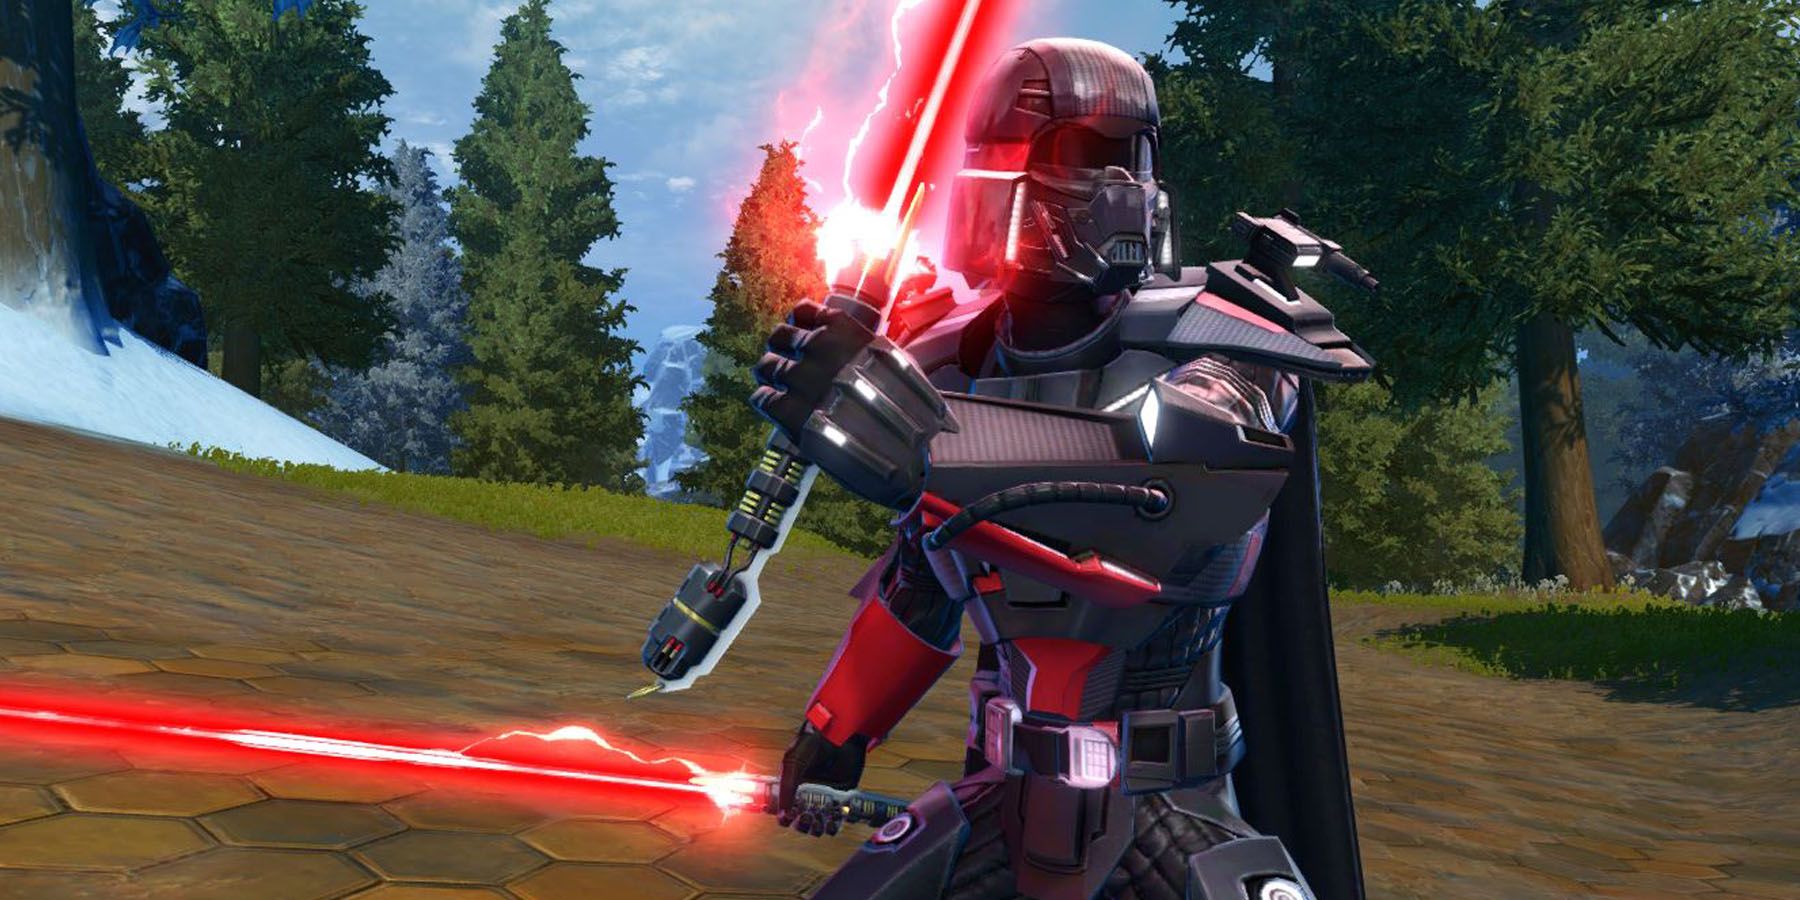 Sith Warrior using dual lightsabers